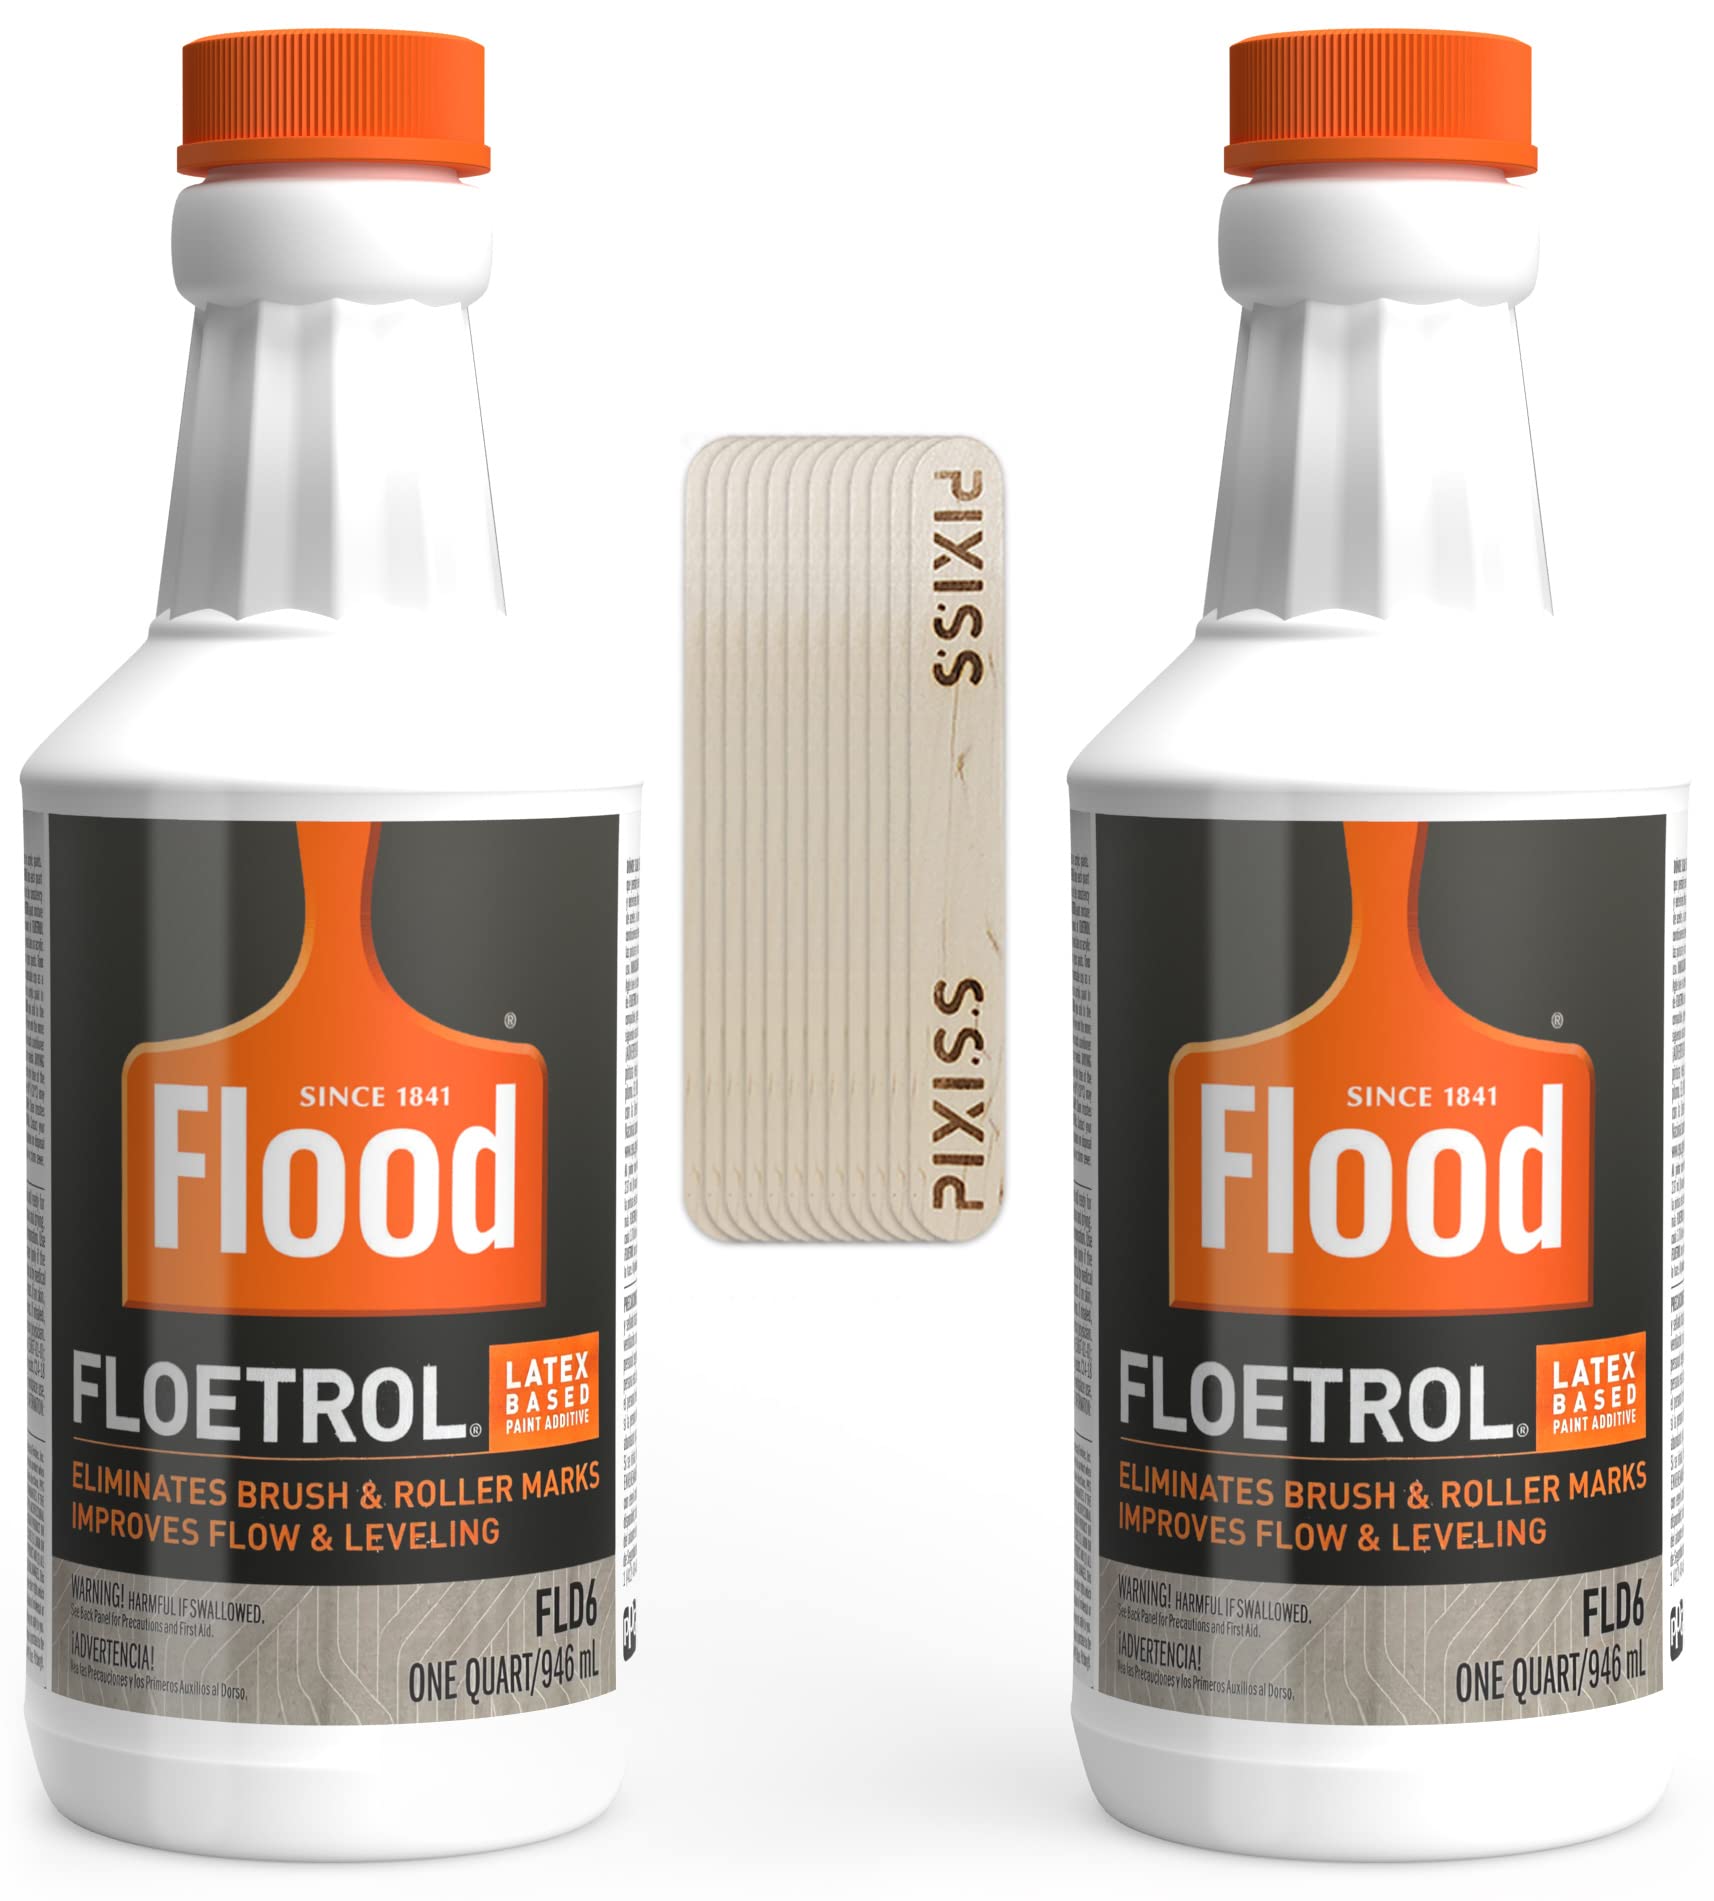 Book Cover Floetrol Paint Additive Pouring Medium for Acrylic Paint - Flood Flotrol Additive & Paint Extender (2-Pack), 20 Pixiss Wood Mixing Sticks Paint Pouring Bundle